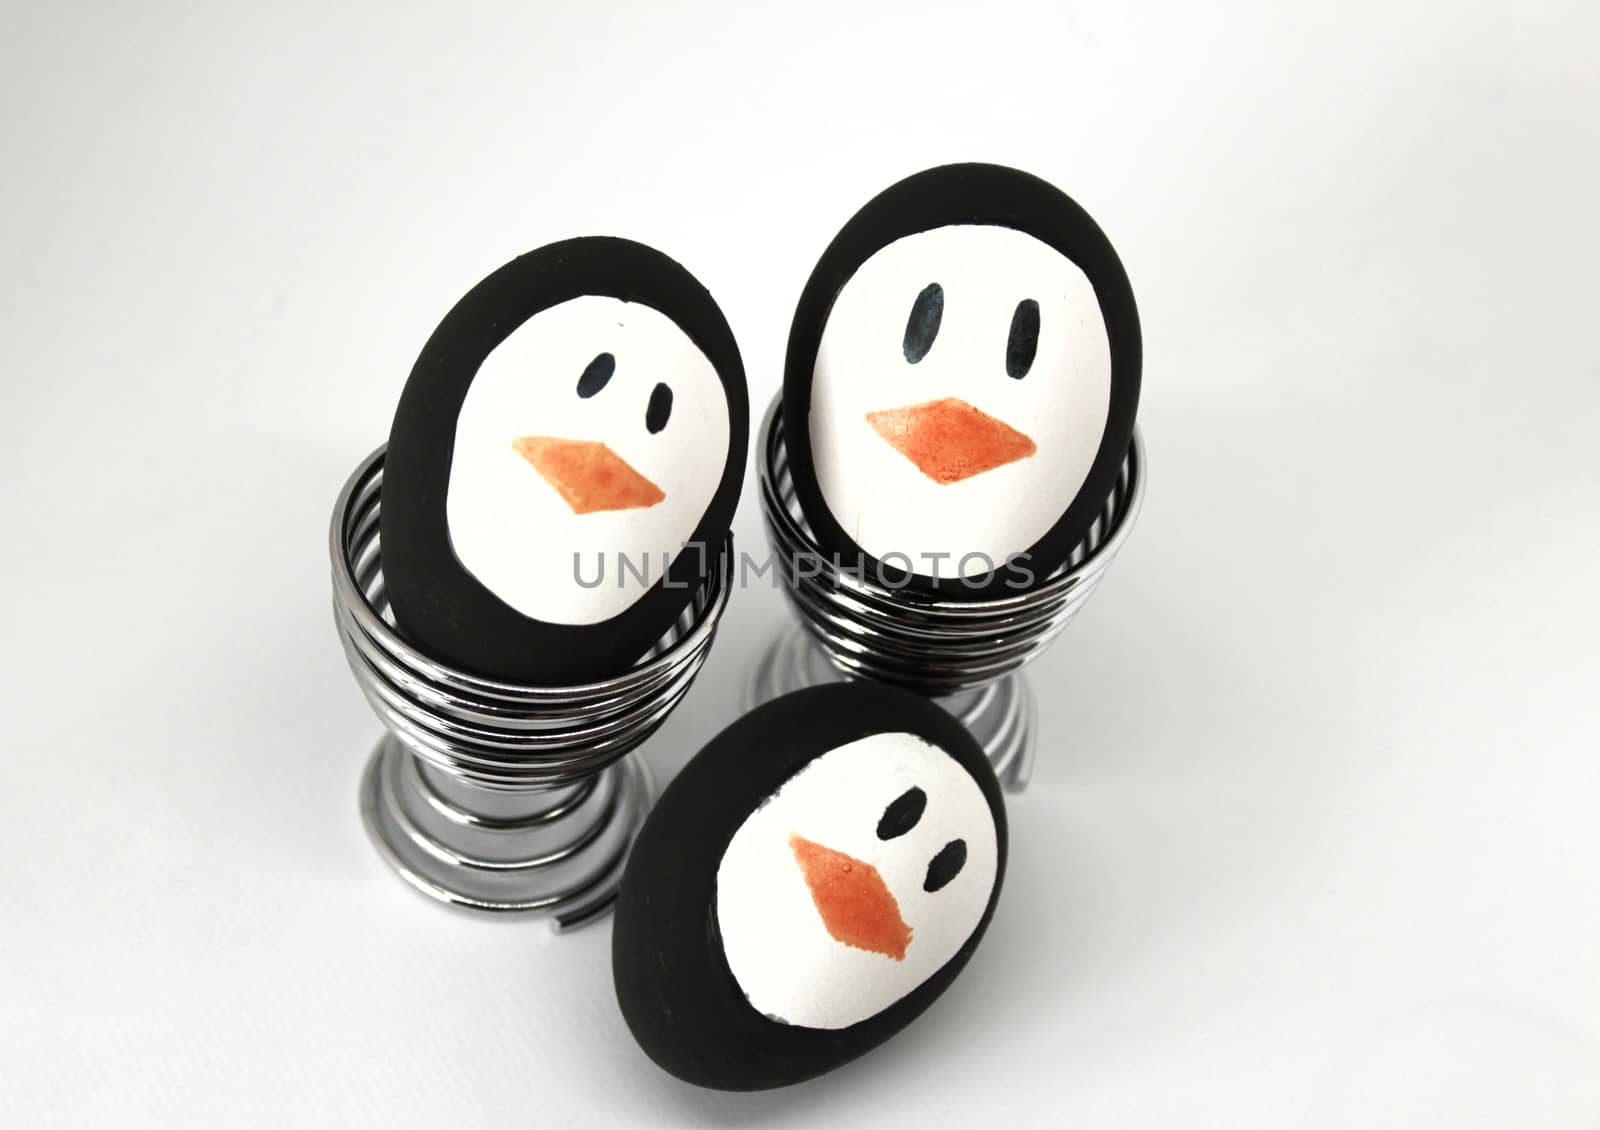 Penguin Easter Eggs on metal egg cup white background by soniabonet